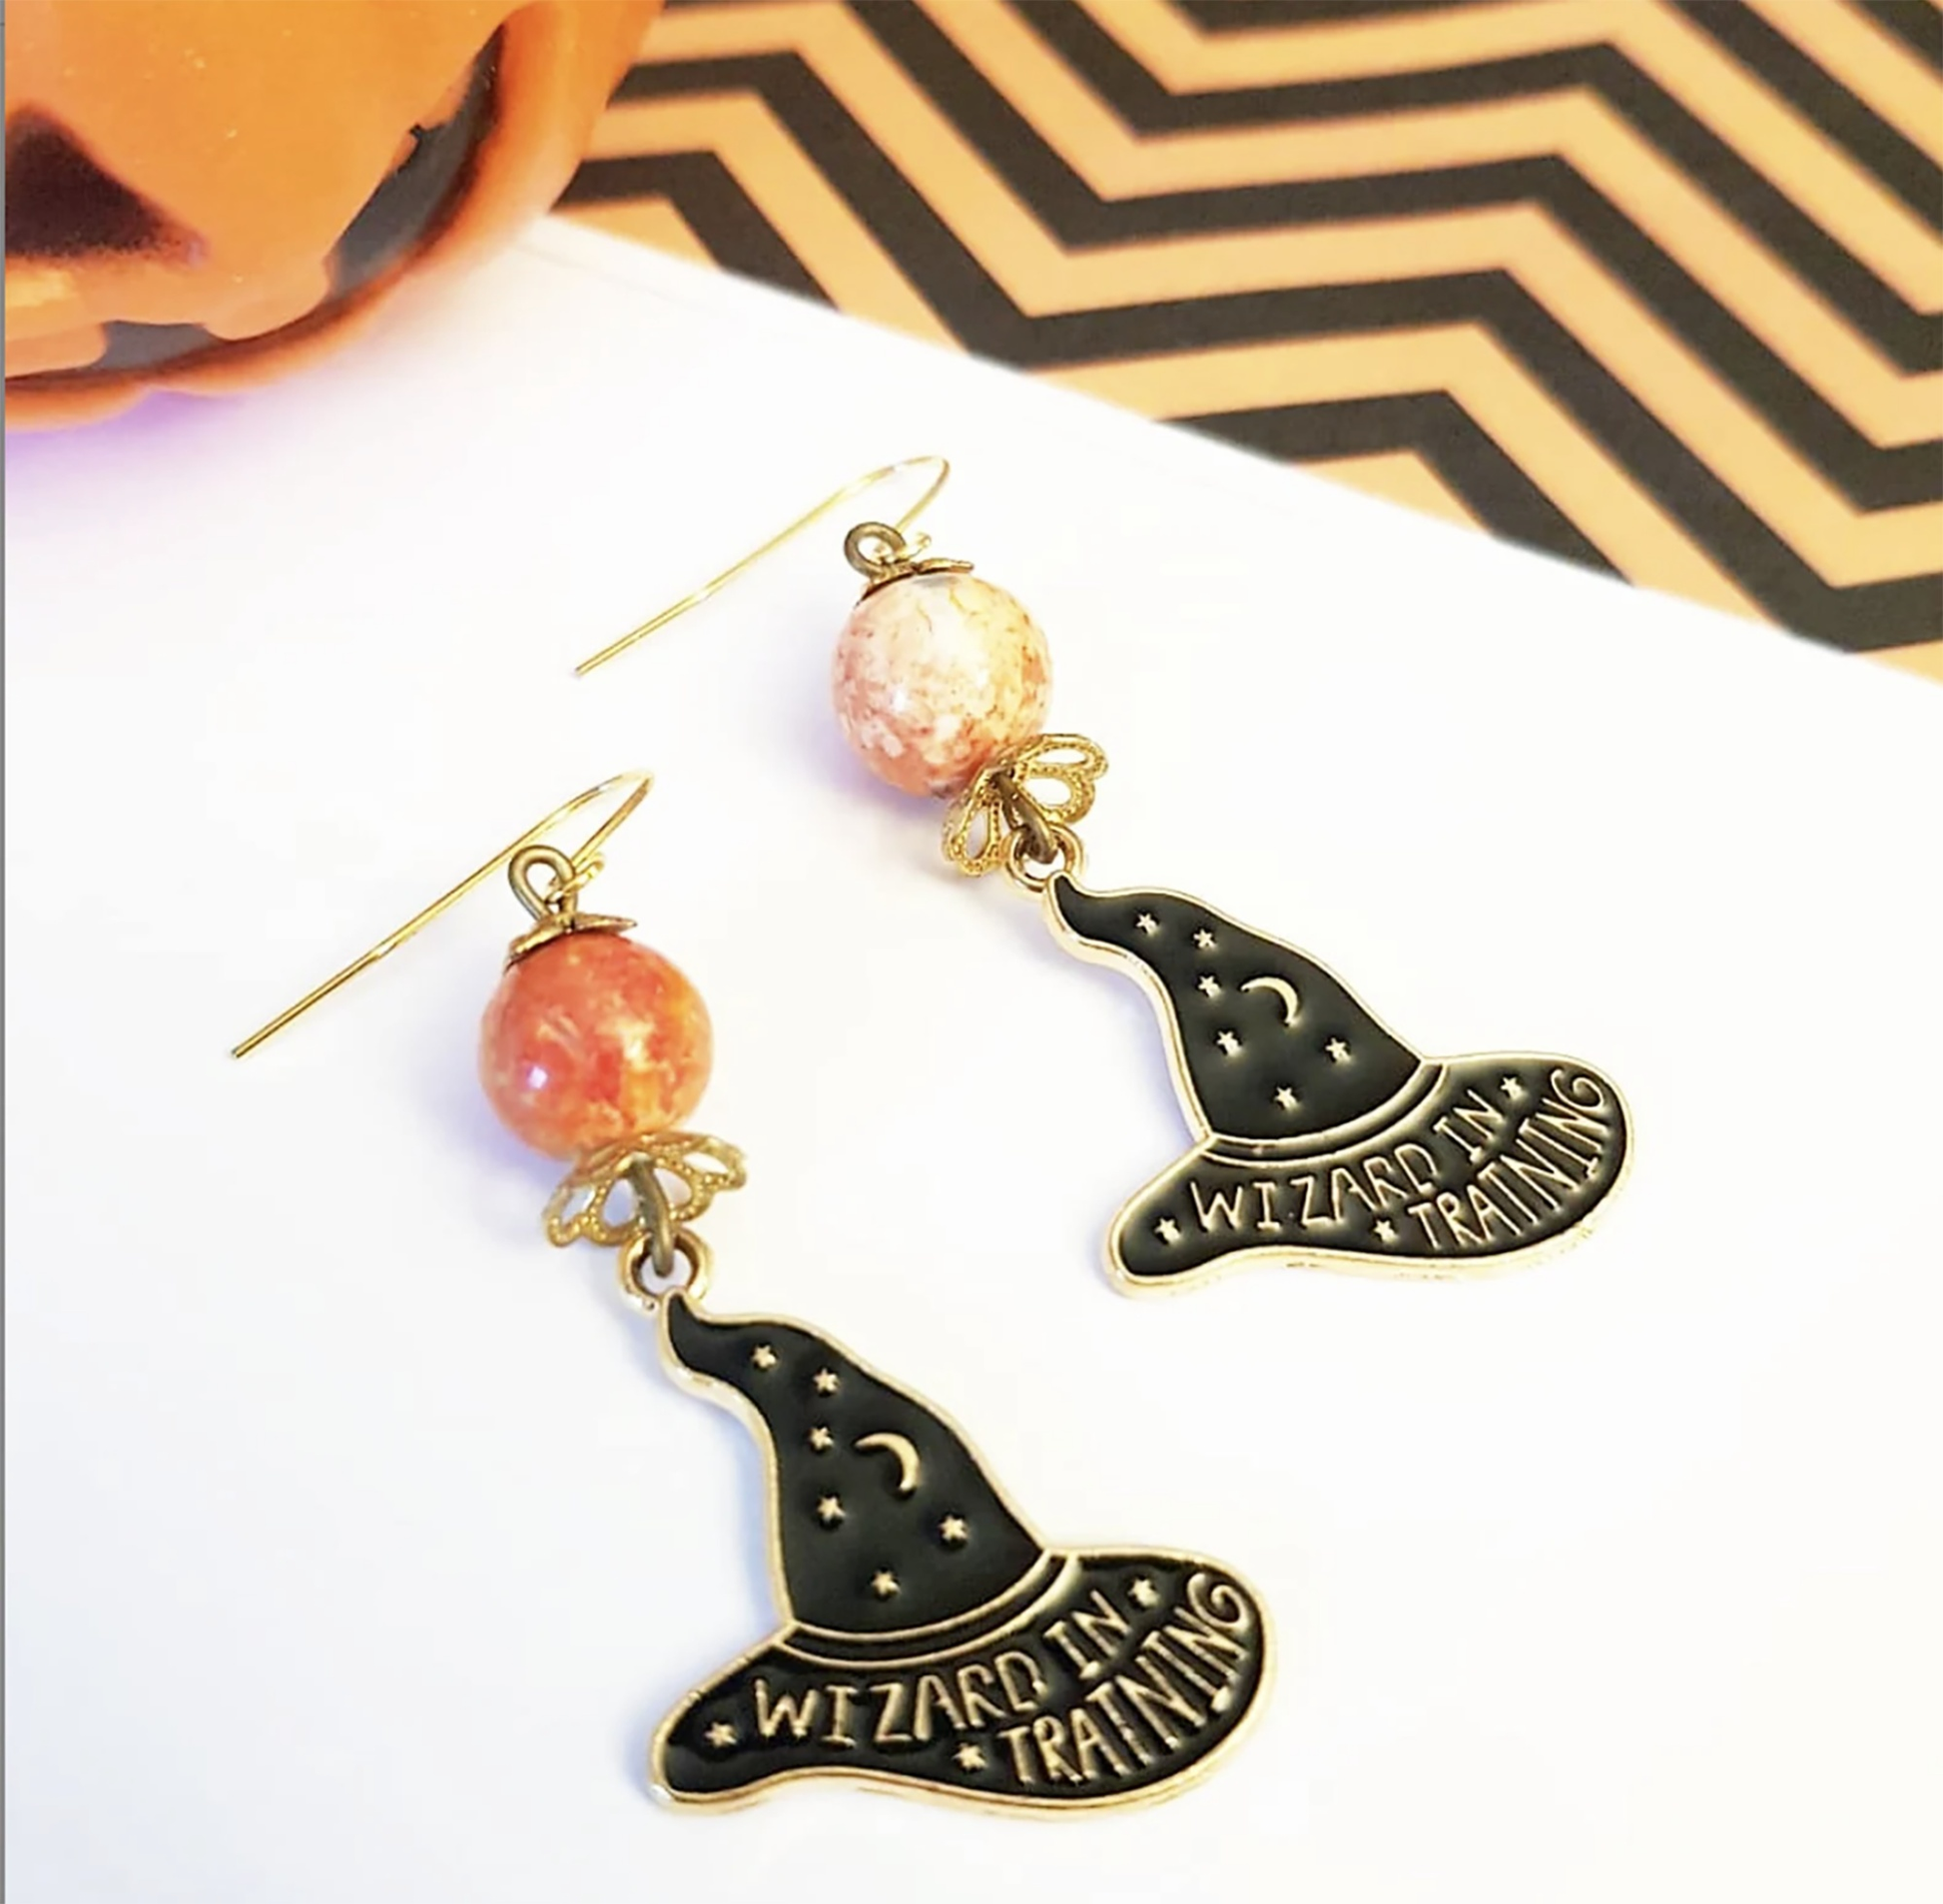 Channel Your Inner Sorceress with These Magical Witch Hat Earrings